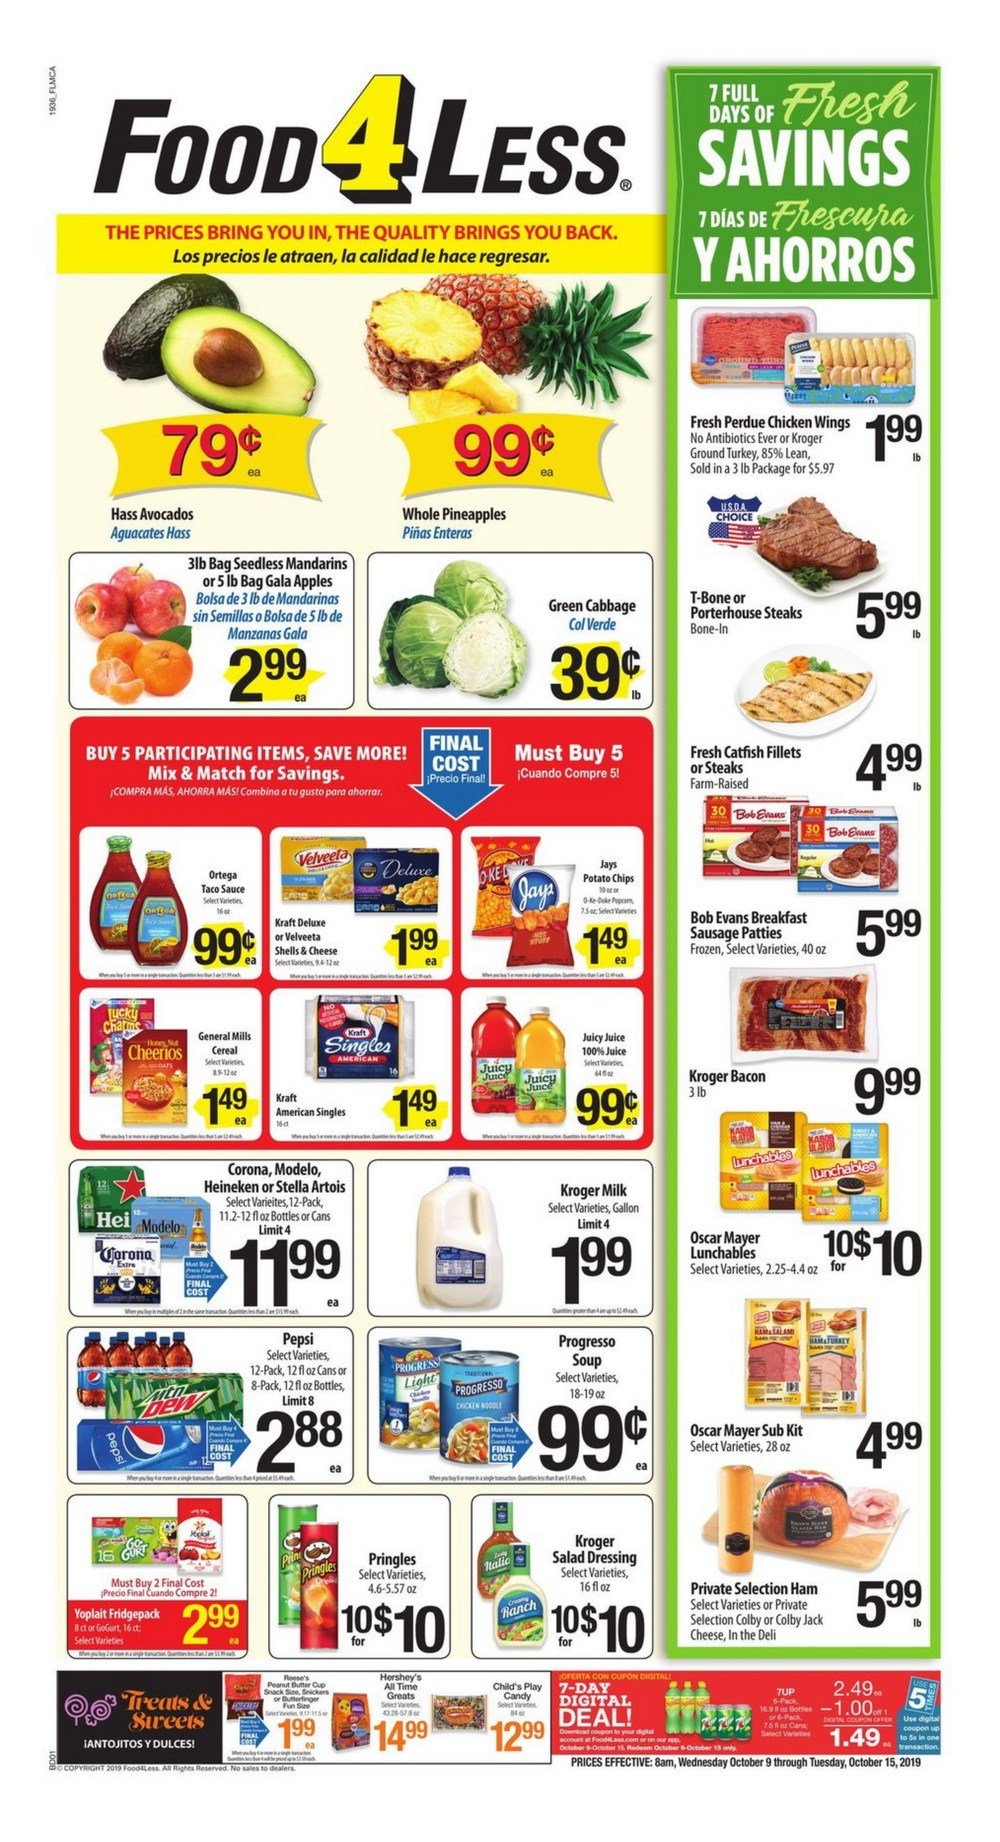 Food 4 Less Weekly Ad Oct 9 - Oct 15, 2019